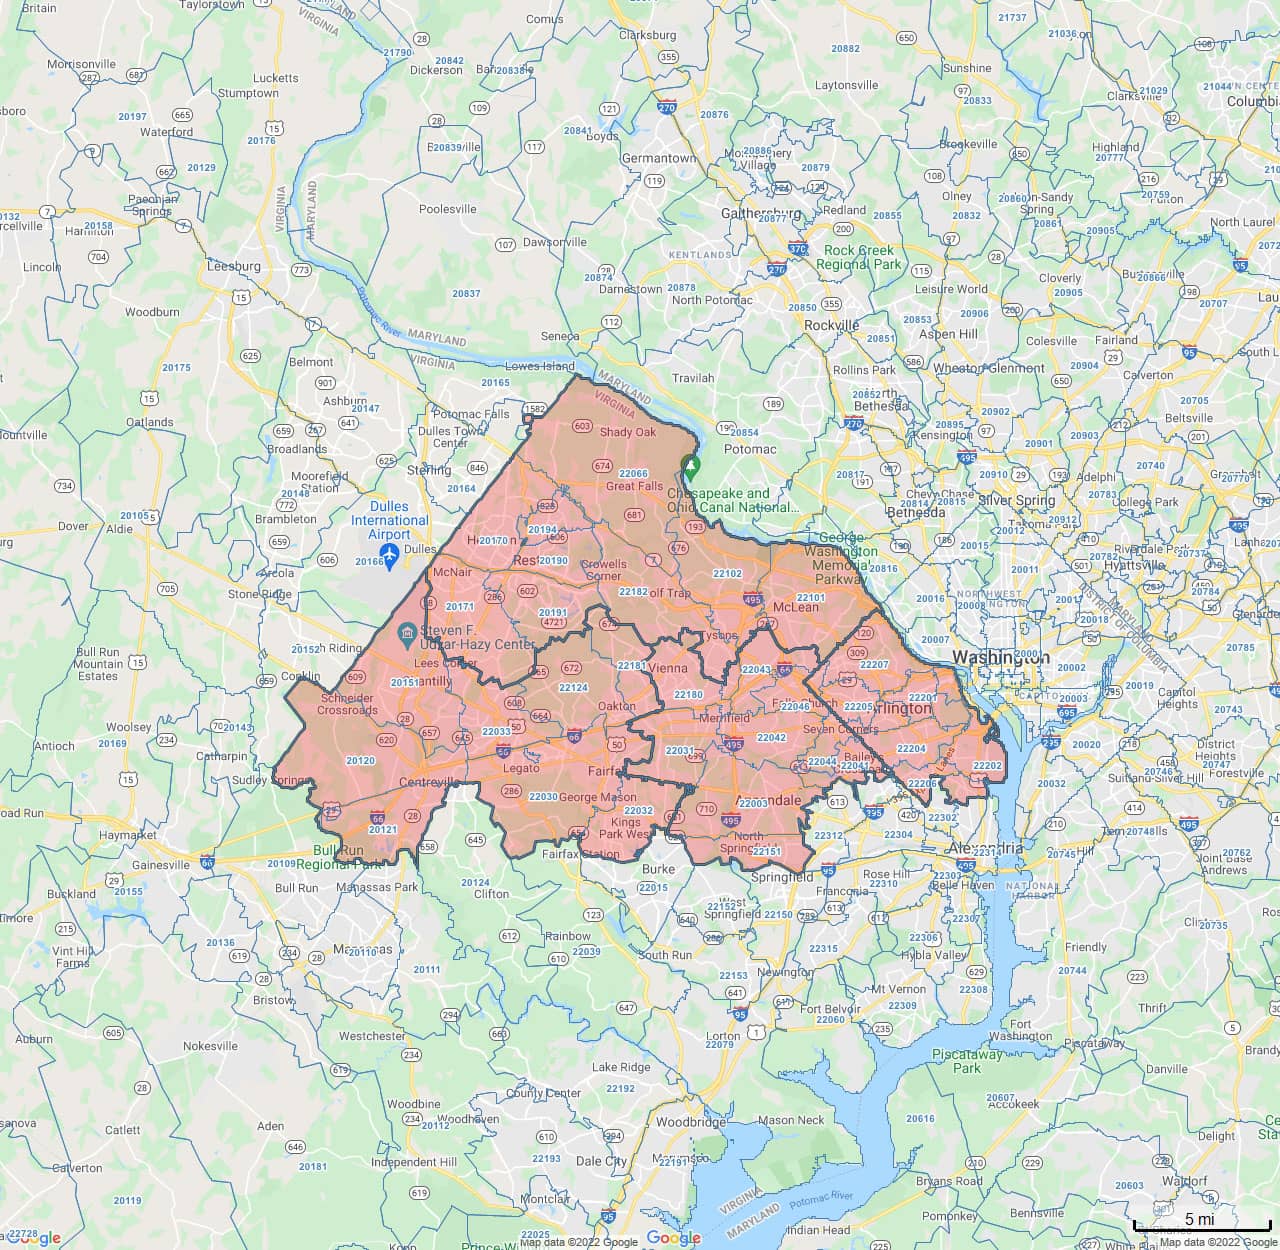 All Dry Services Area Coverage Map for Northern Virginia